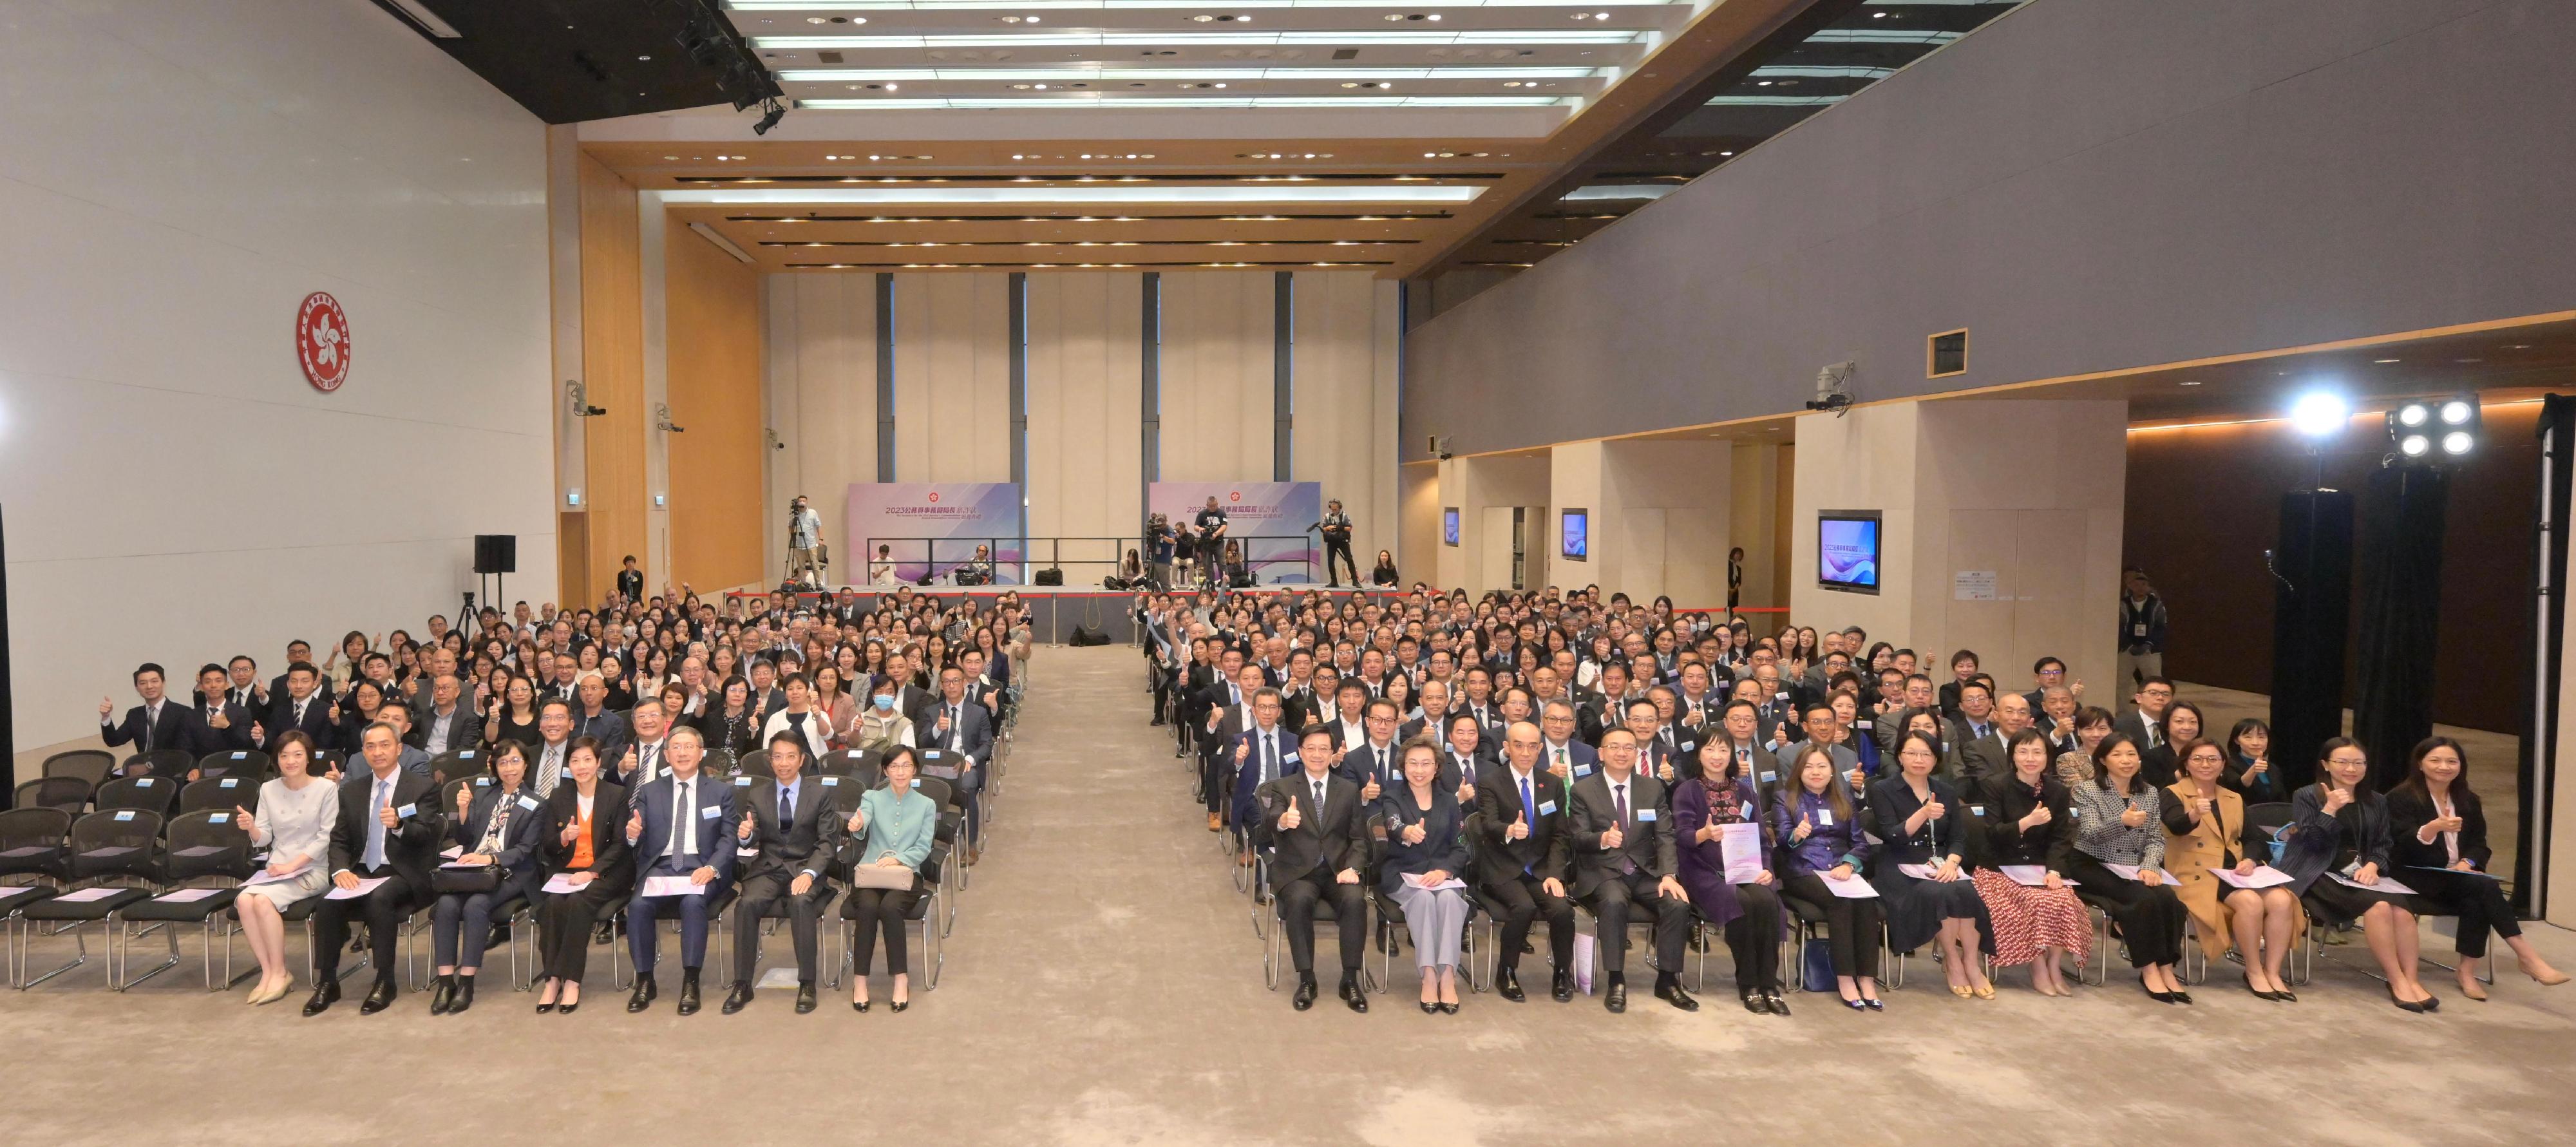 The Chief Executive, Mr John Lee, attended the Secretary for the Civil Service's Commendation Award Presentation Ceremony 2022 at the Central Government Offices today (November 28). Photo shows Mr Lee (first row, eighth left); the Secretary for the Civil Service, Mrs Ingrid Yeung (first row, ninth left); the Chairman of the Public Service Commission, Ms Maisie Cheng (first row, seventh left); the Permanent Secretary for the Civil Service, Mr Clement Leung (first row, sixth left); the Head of the Civil Service College, Mr Oscar Kwok (first row, second left), and about 50 Permanent Secretaries and Heads of Departments with award recipients.